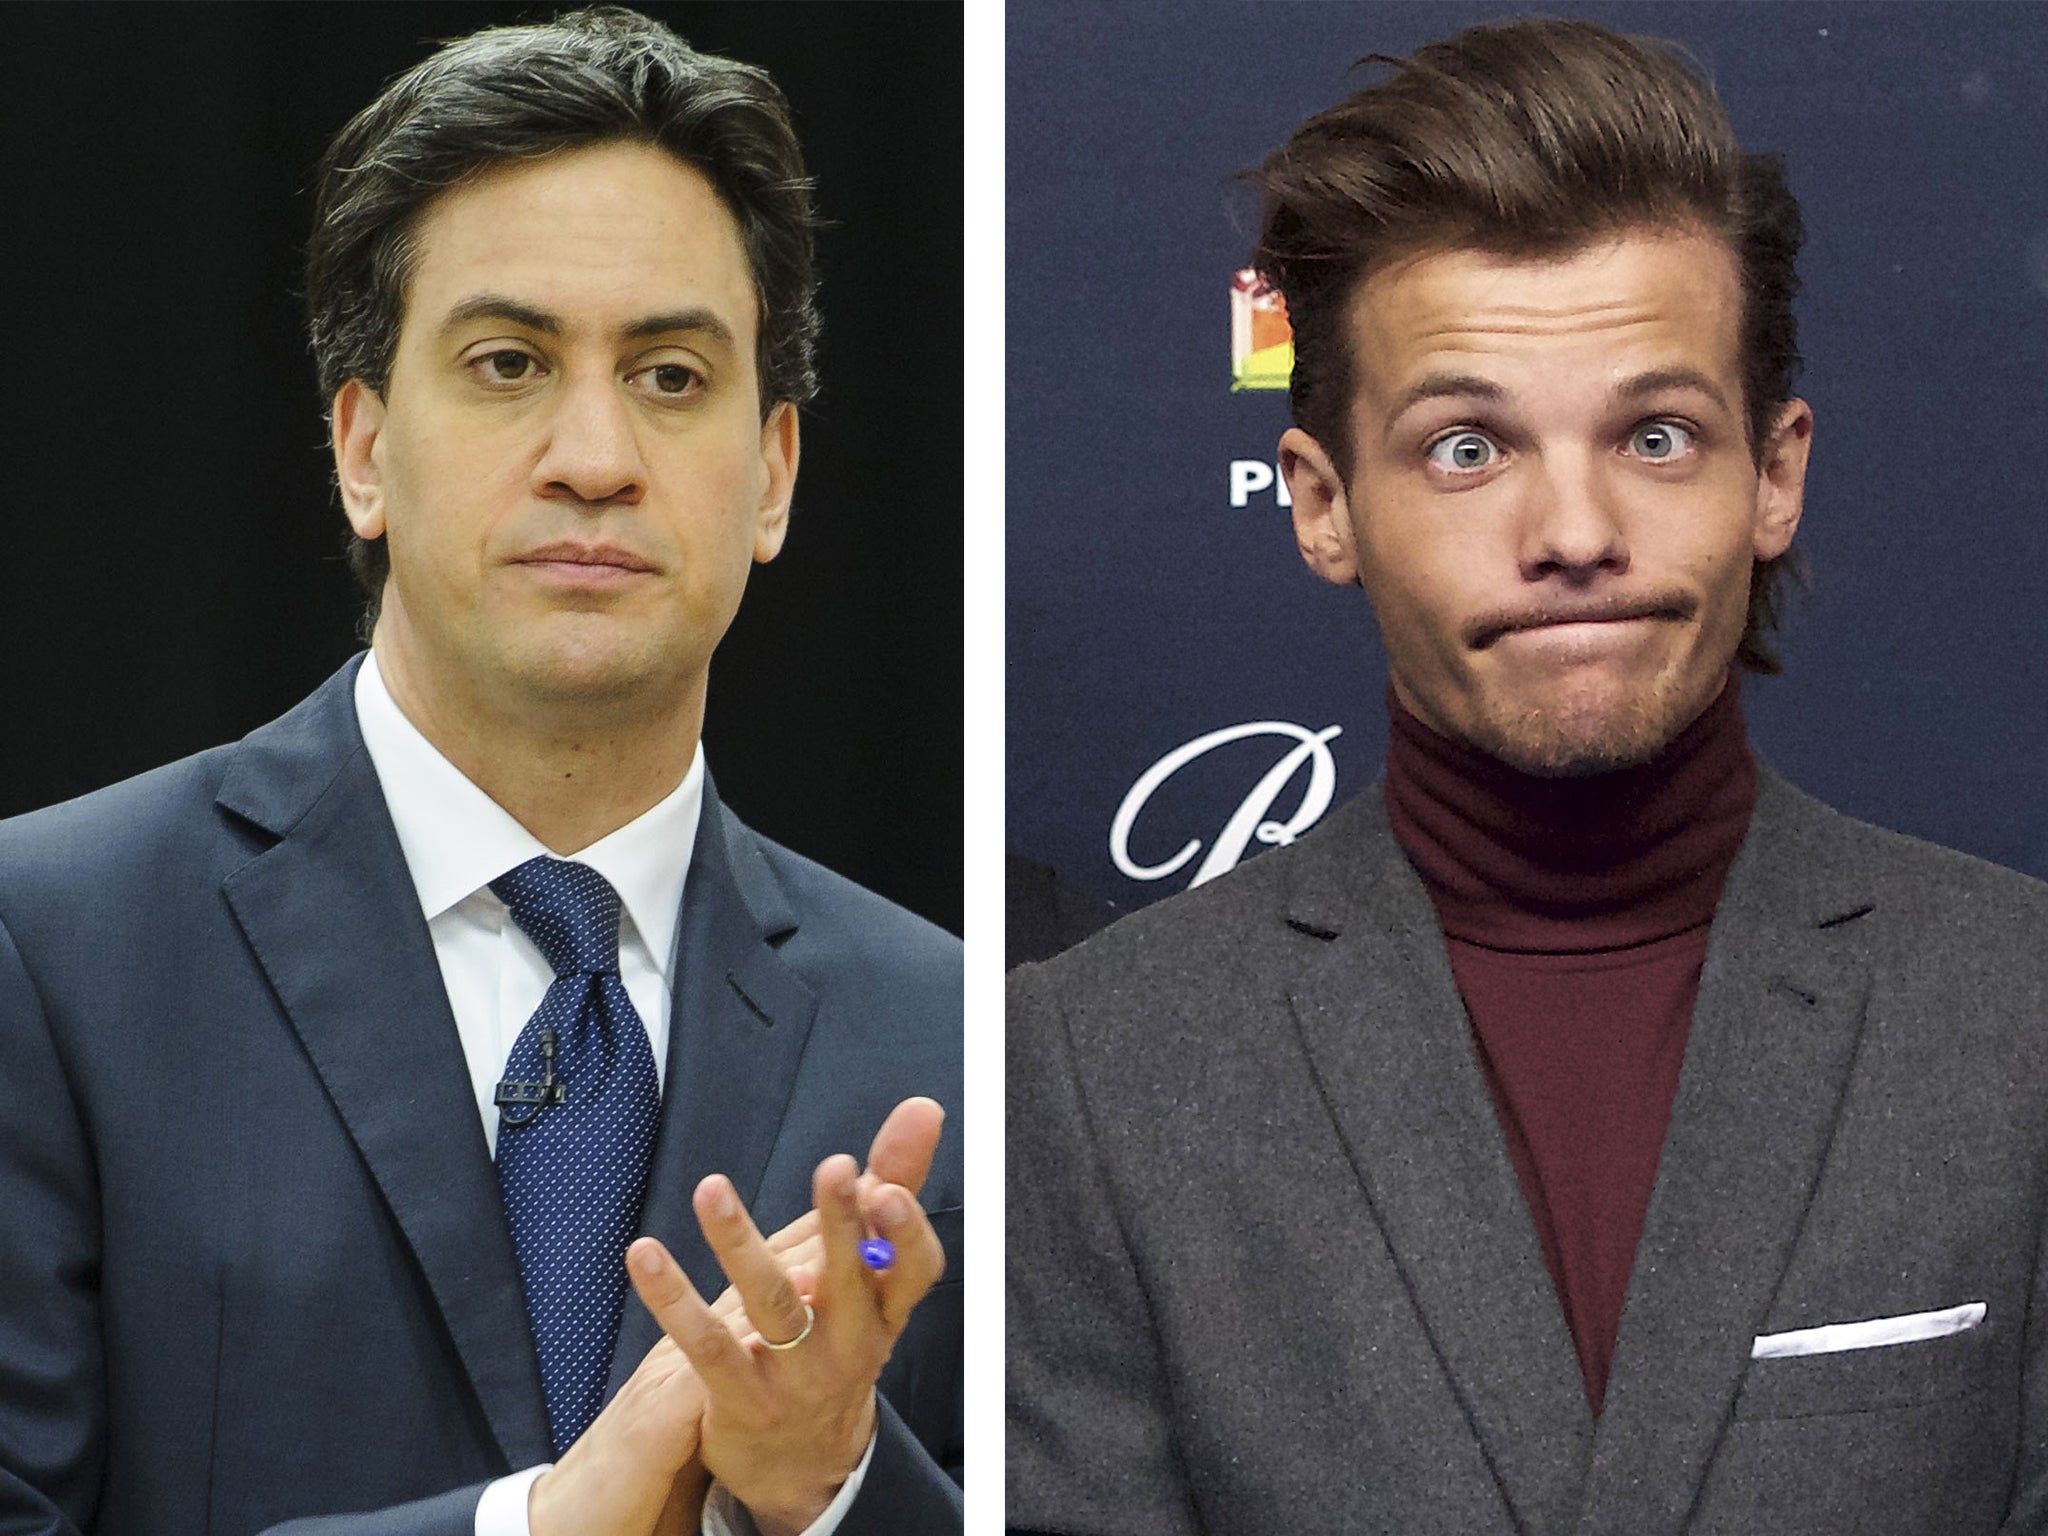 Ed Miliband came one place below Louis Tomlinson in the Doncaster Power List